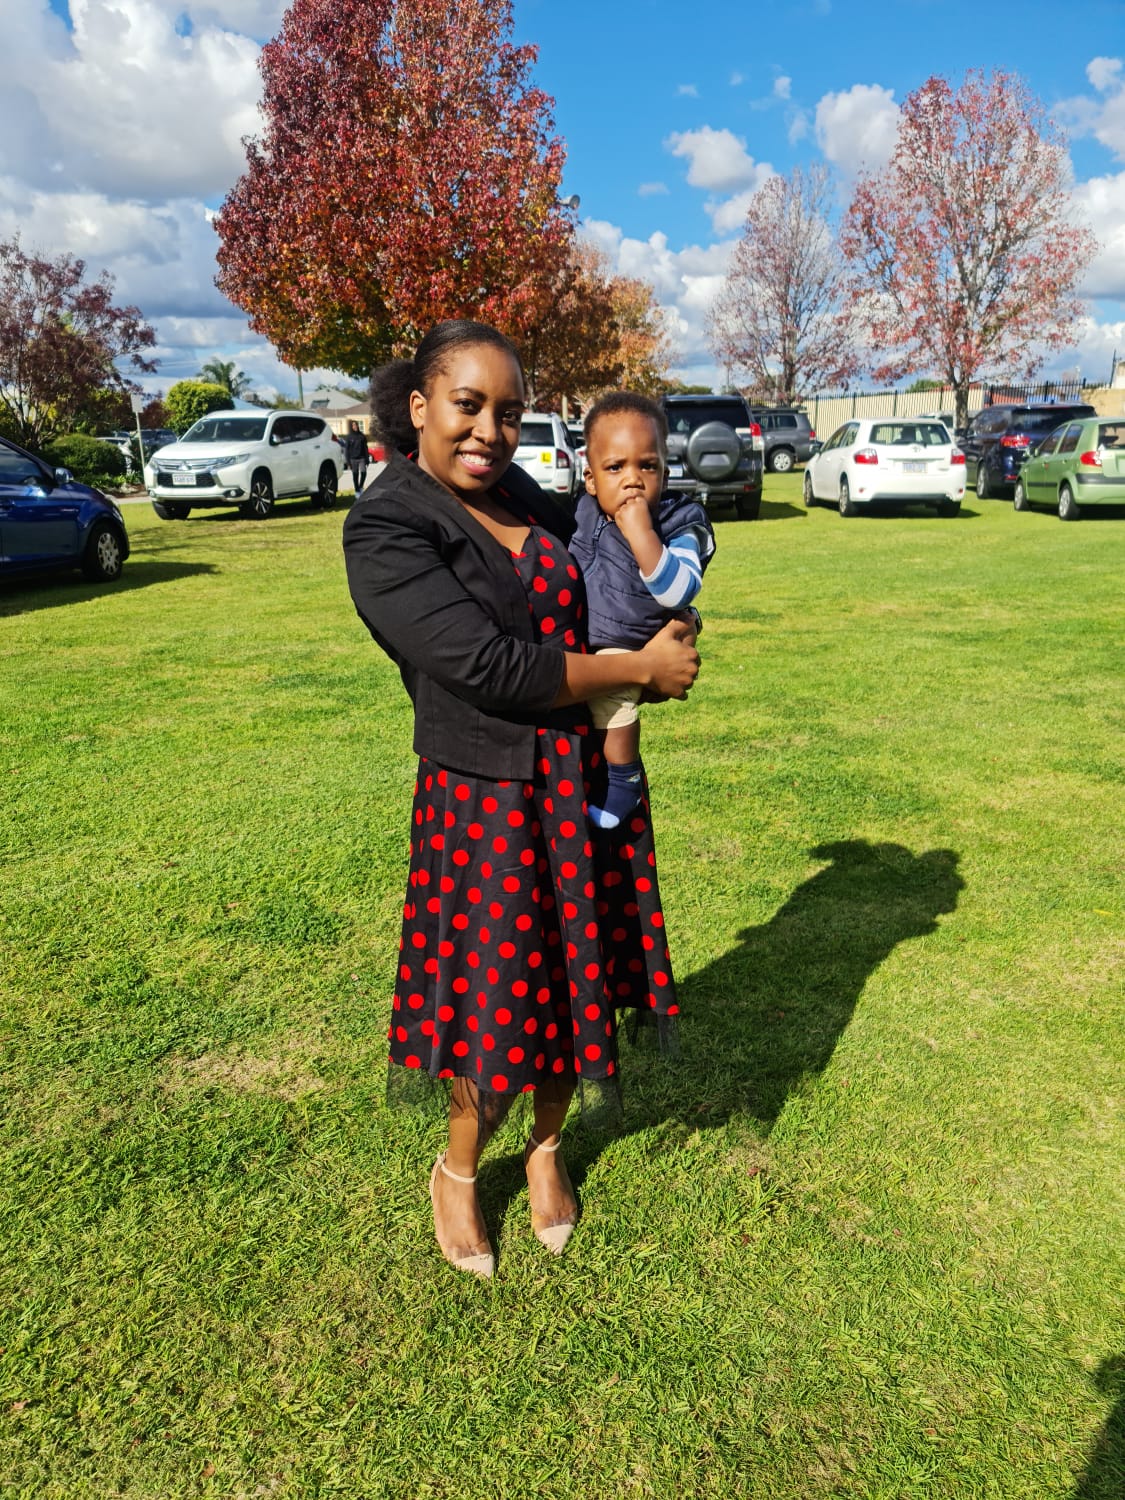 Meet Maka Chikoka, Consultant, Cyber Security & Risk Services at RSM who shares her experience of juggling her career and family with a firm that has market-leading policies and programs to support working families.